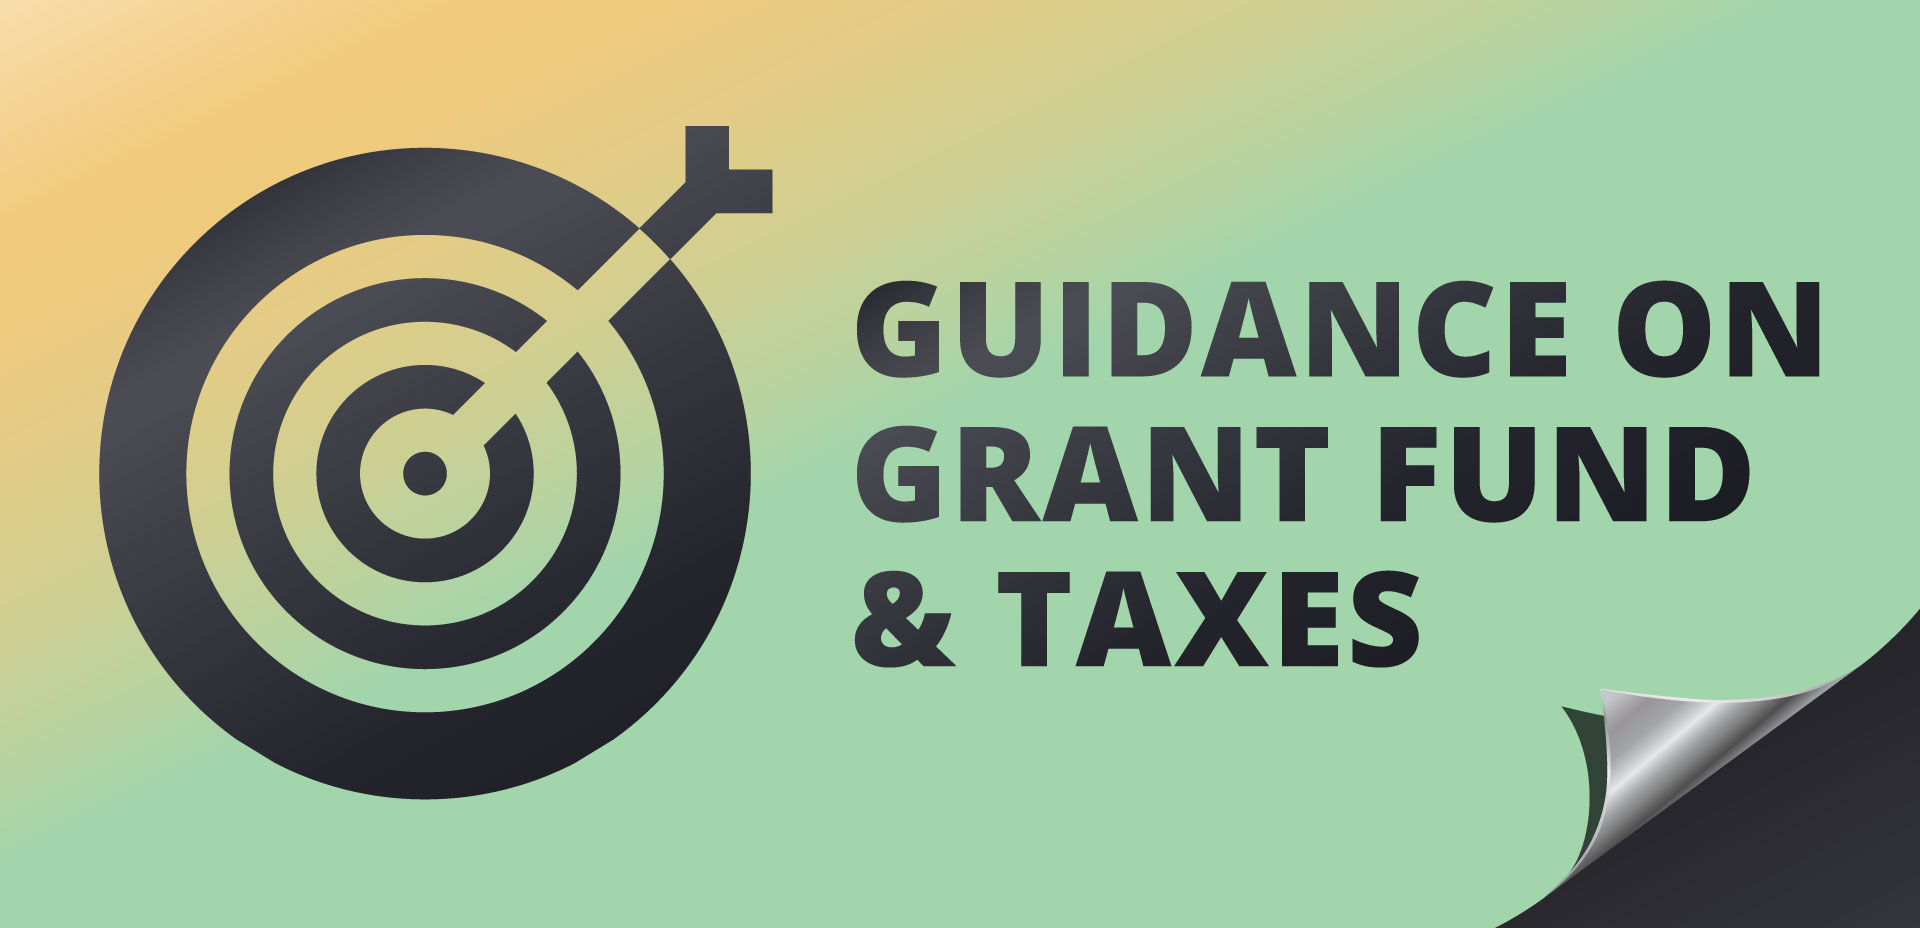 Guidance on Grant Funds & Taxes